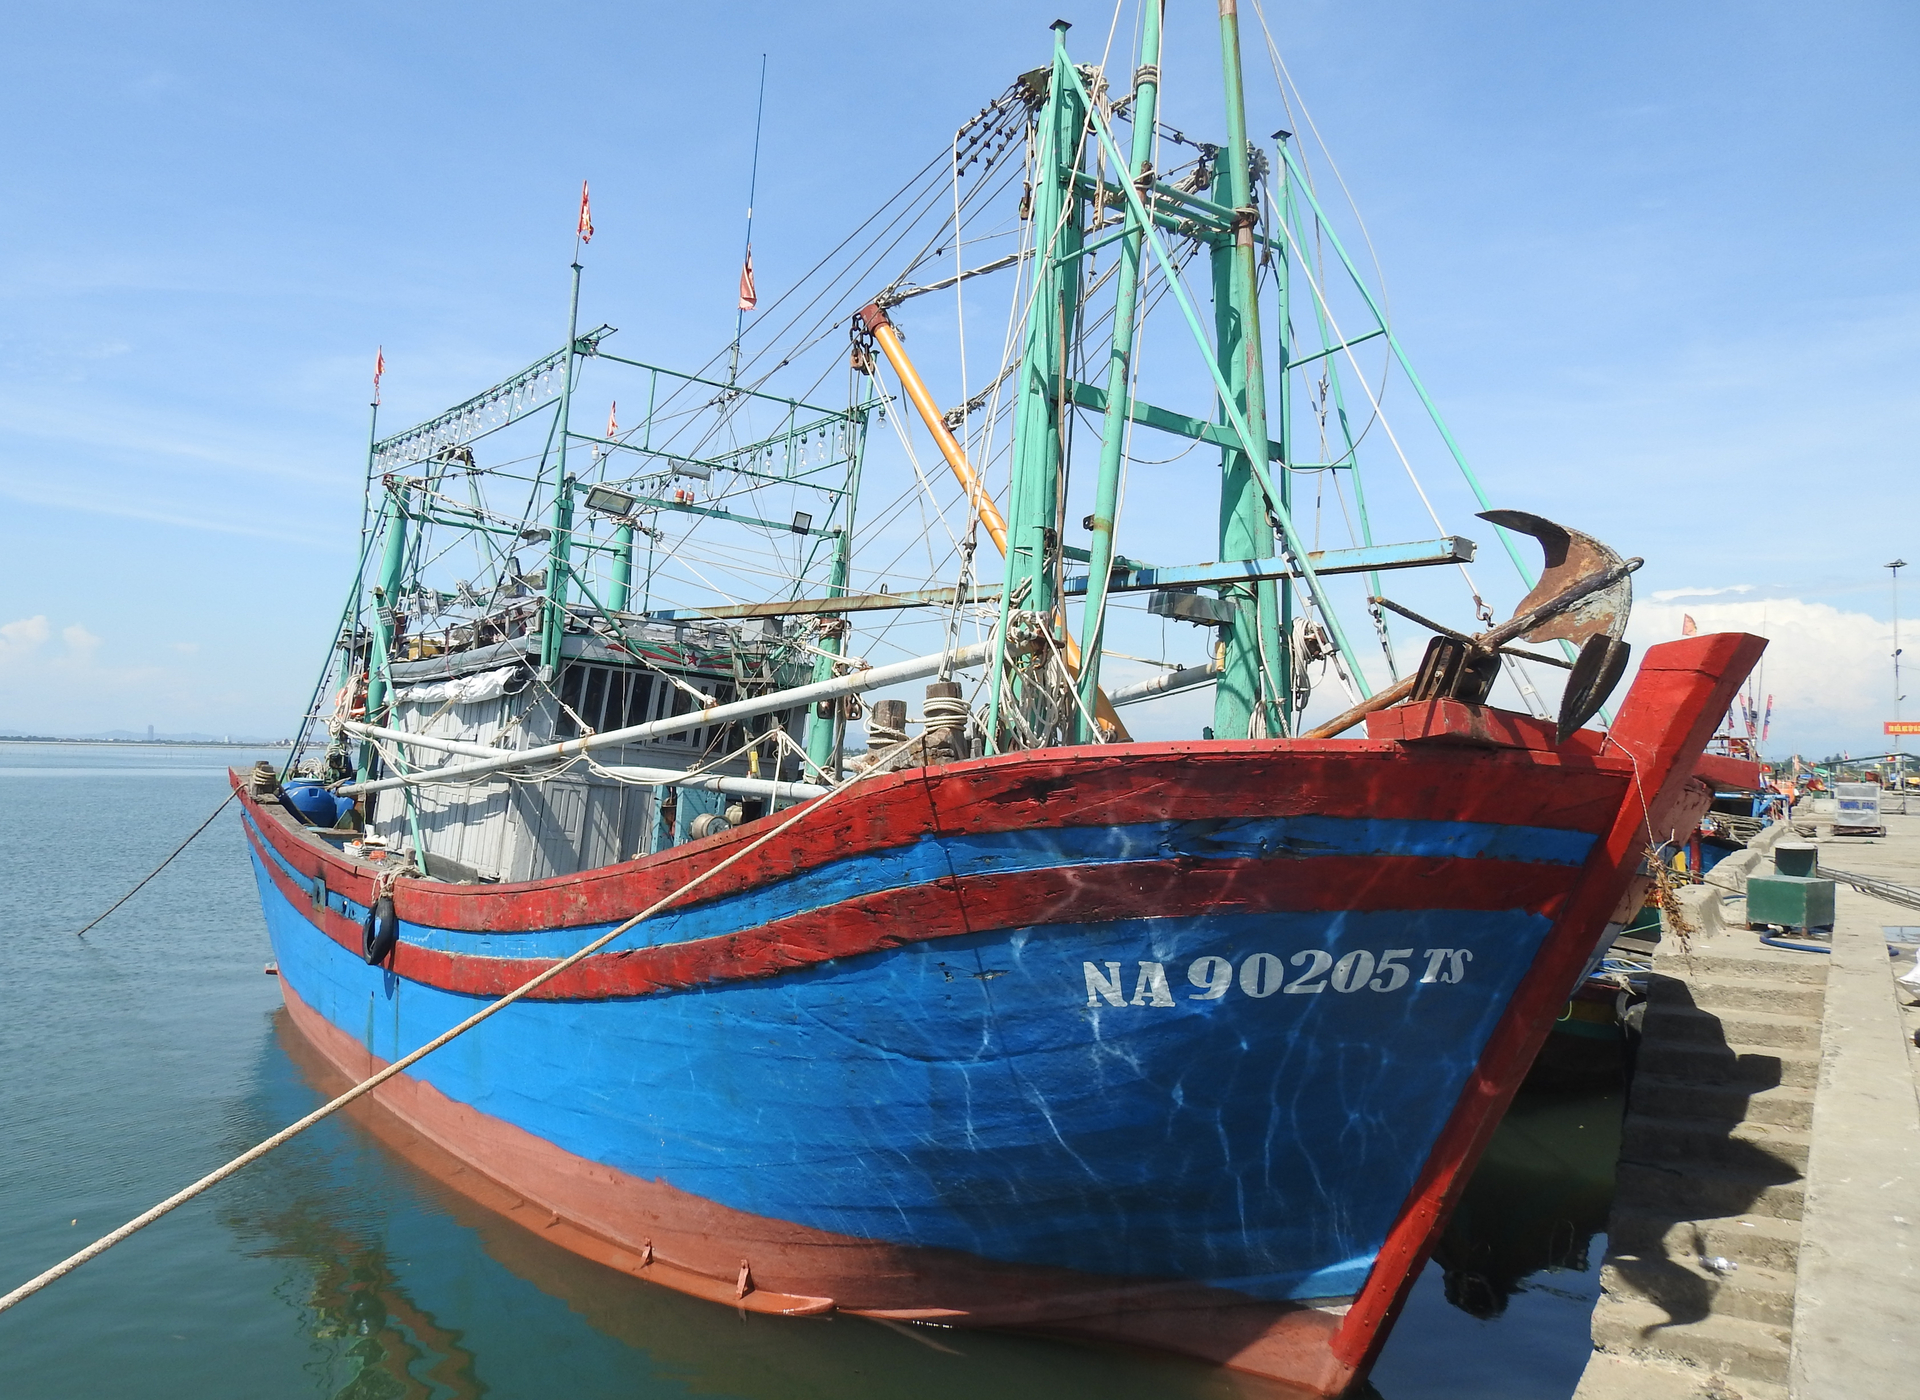 Twelve provinces in Central Vietnam joined forces to combat IUU fishing. Photo: Thanh Nga.